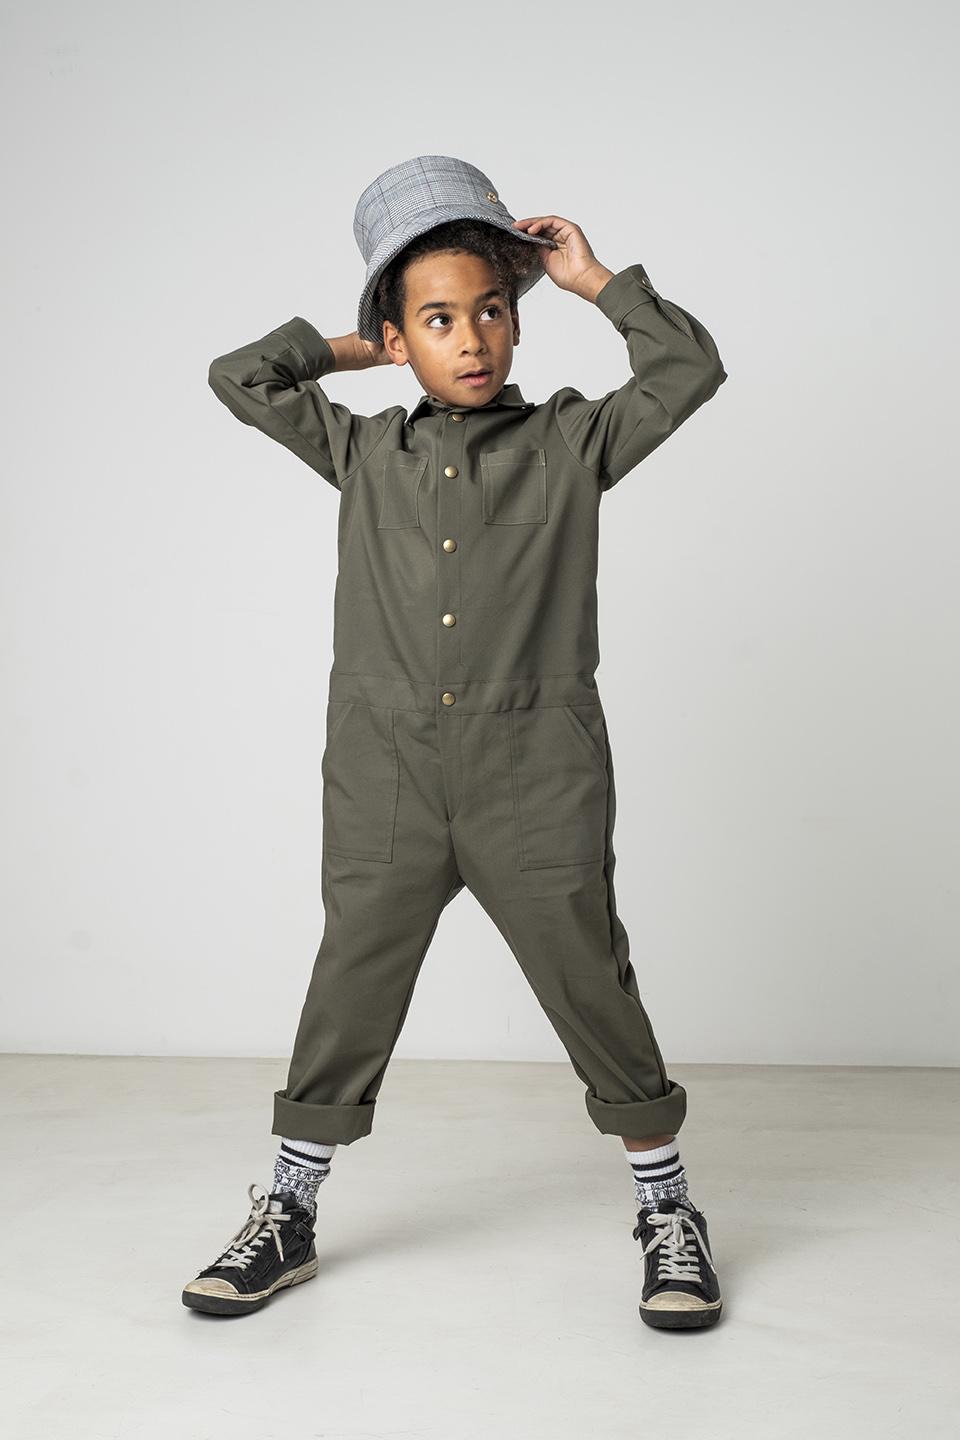 Child wearing the Child/Teen Indigo Jumpsuit sewing pattern from Fibre Mood on The Fold Line. A jumpsuit pattern made in cotton, viscose, wool or denim fabrics, featuring a collar, front button closure, 4 patch pockets, full length sleeves with button cuf